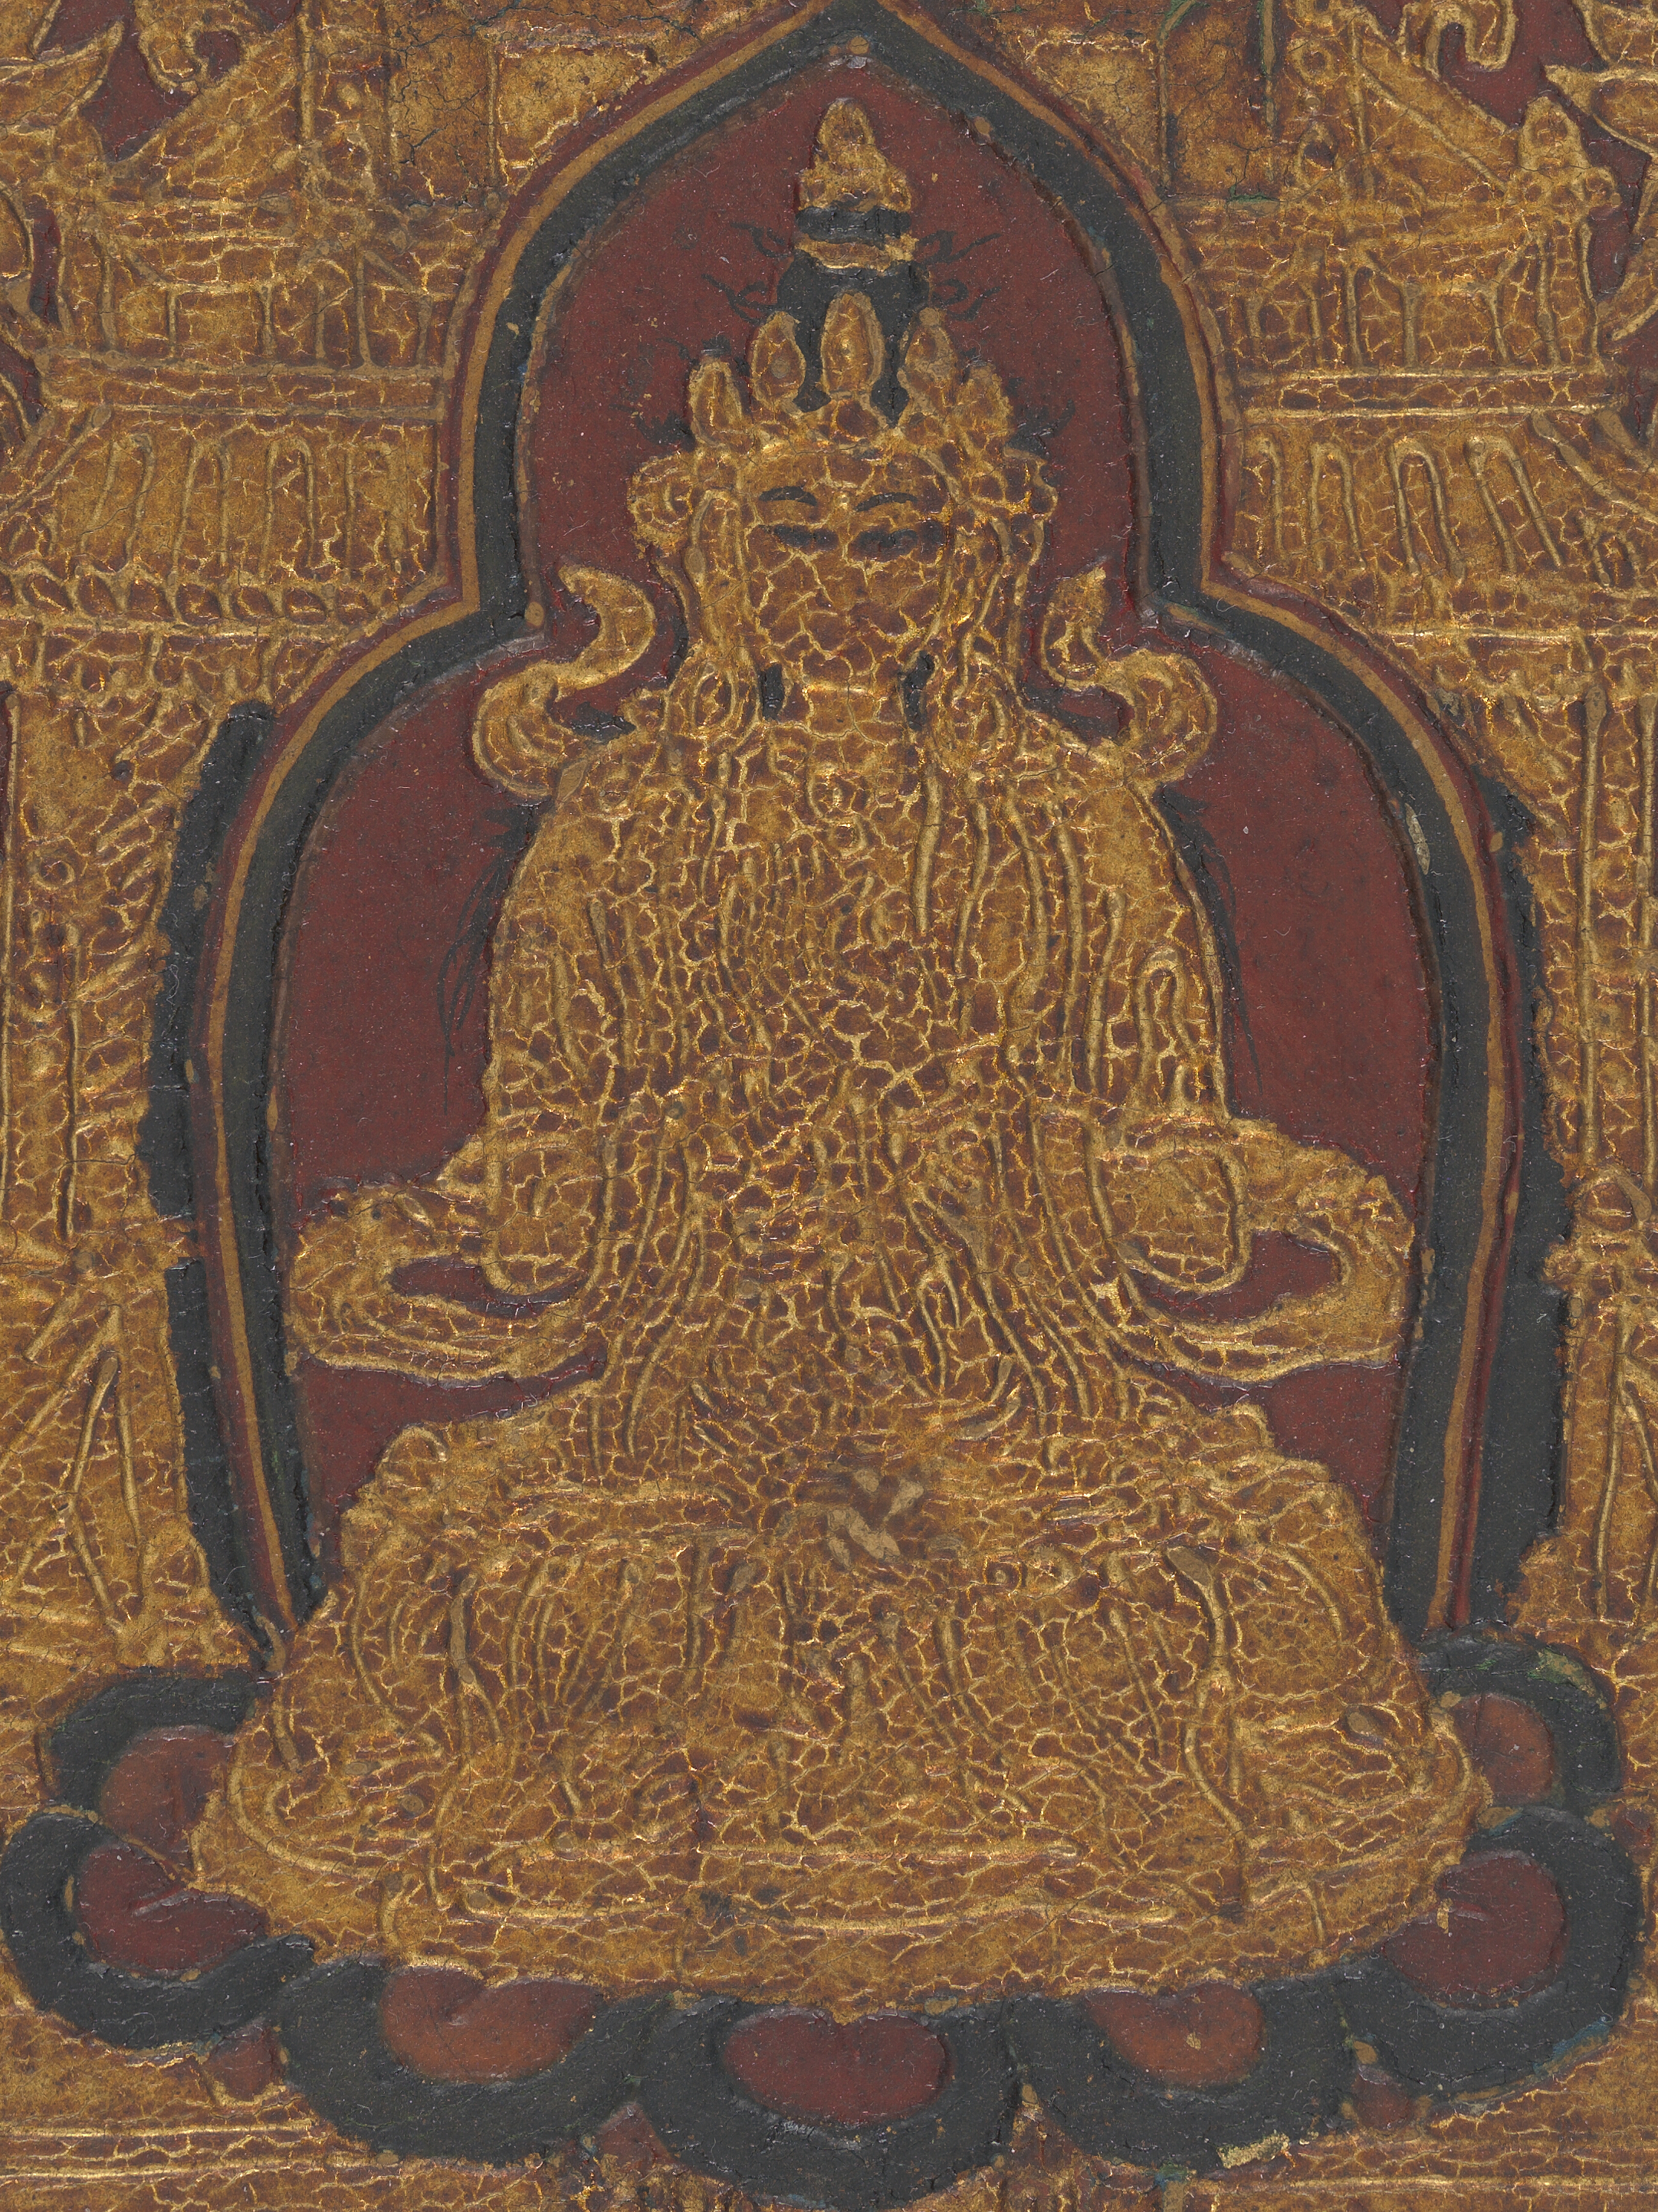 Torana-shaped panel with gilded raised decoration depicting a seated figure with some outlines in black and a red background.